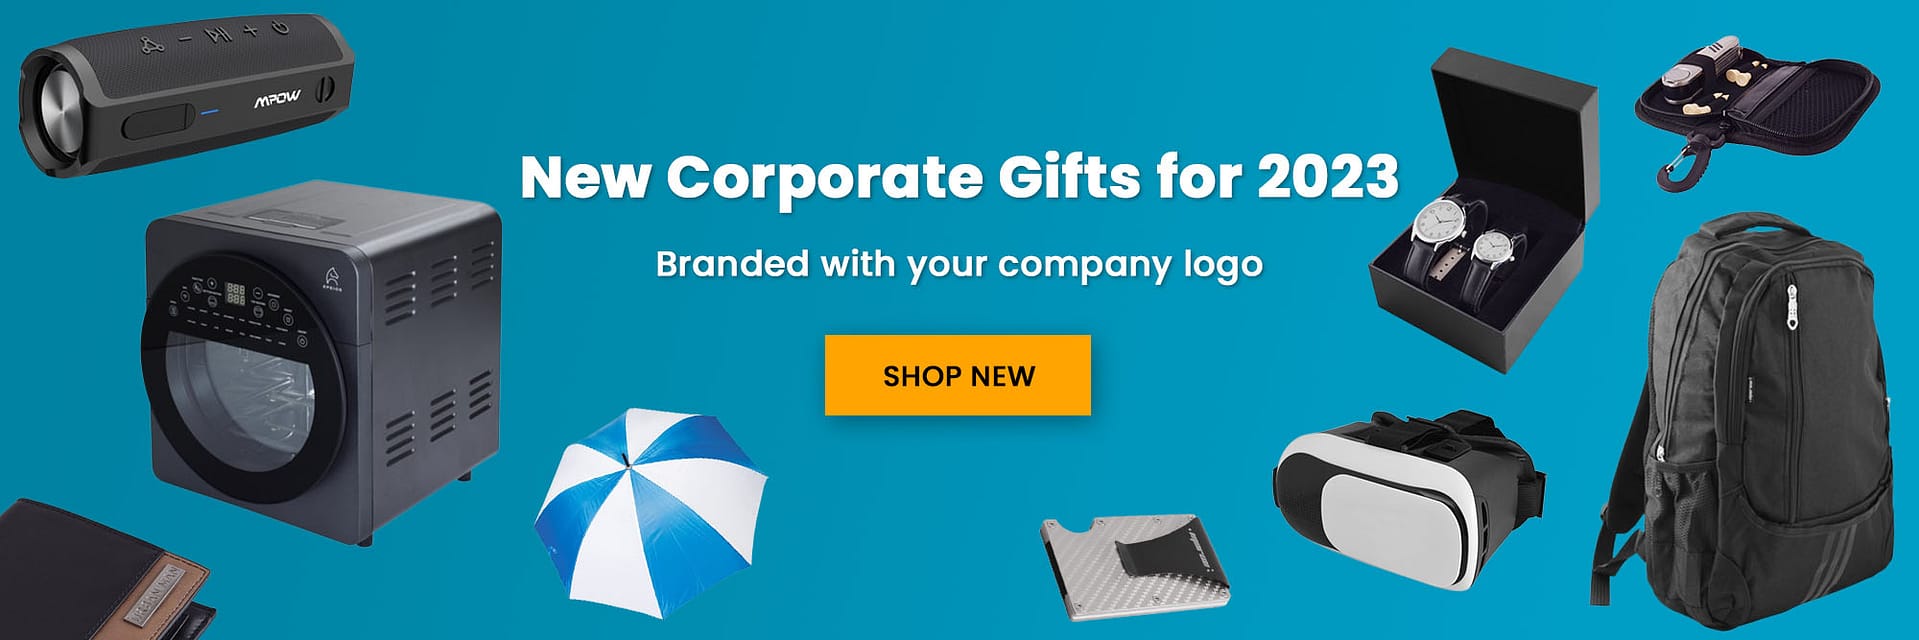 New Corporate Gifts